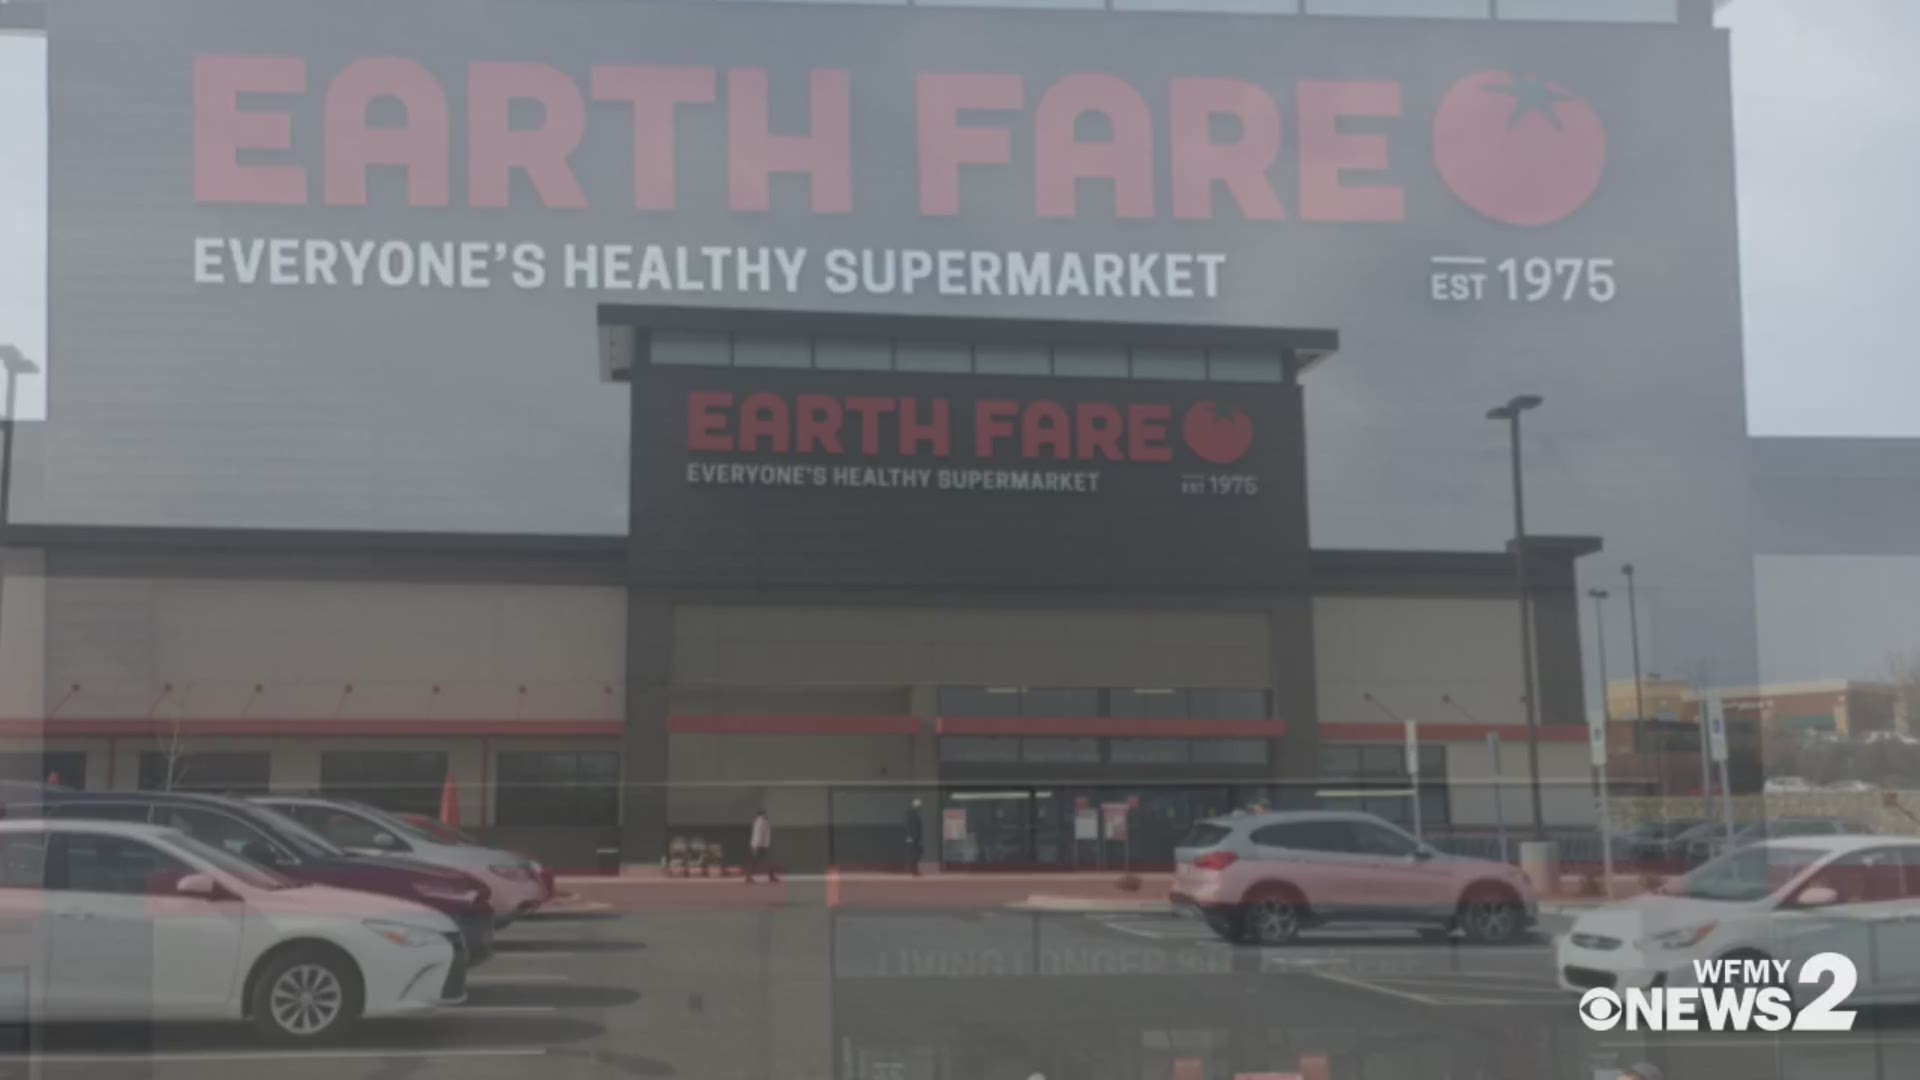 The grocery chain says about 100 people at the Earth Fare stores in Greensboro and High Point will be impacted by the closure.